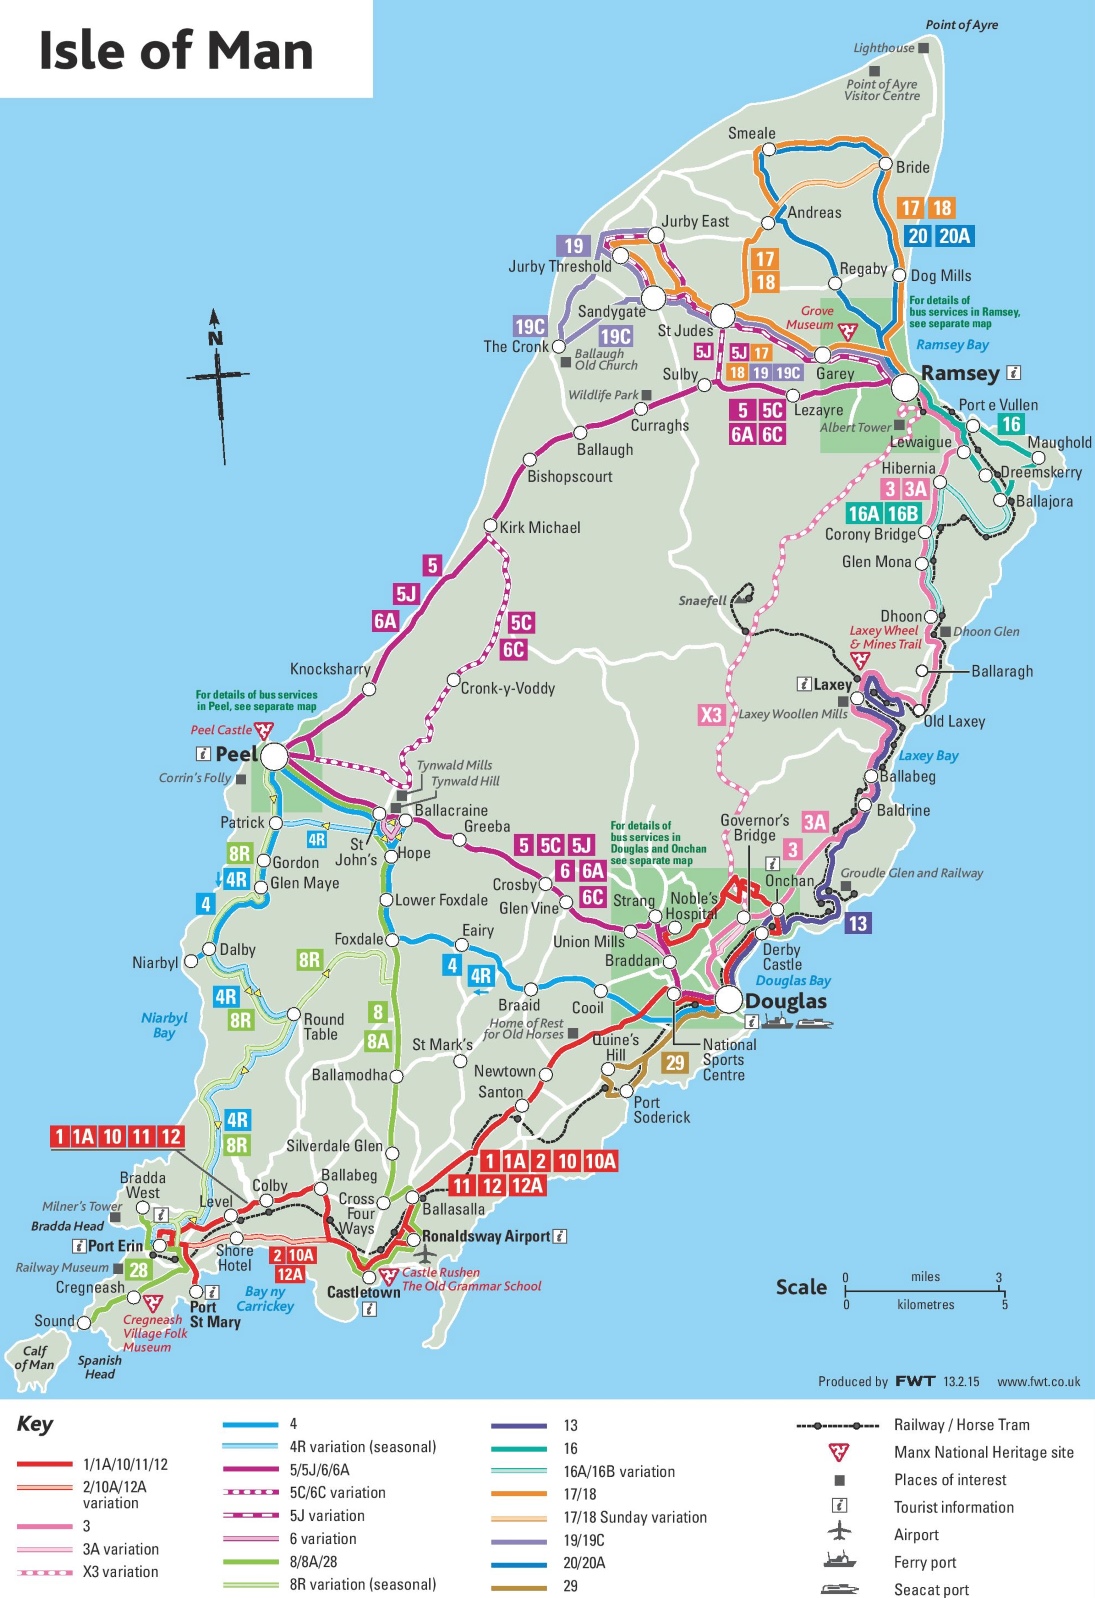 east asia travel limited isle of man